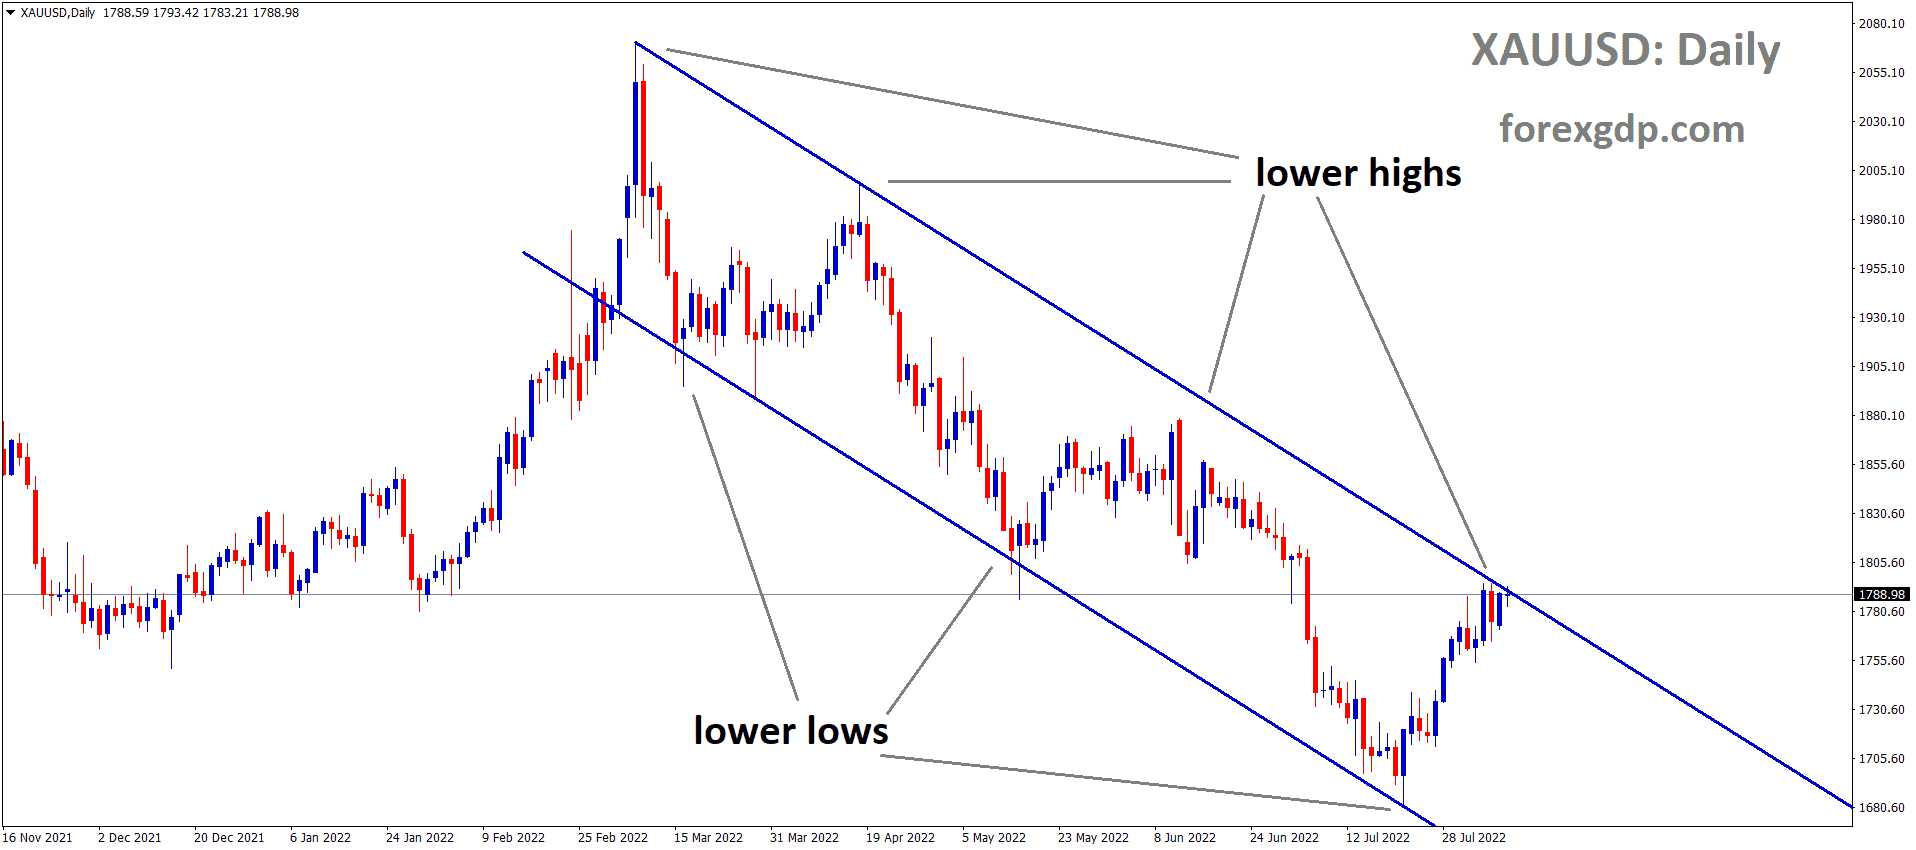 XAUUSD Gold price is moving in the Descending channel and the Market has reached the Lower high area of the channel 1